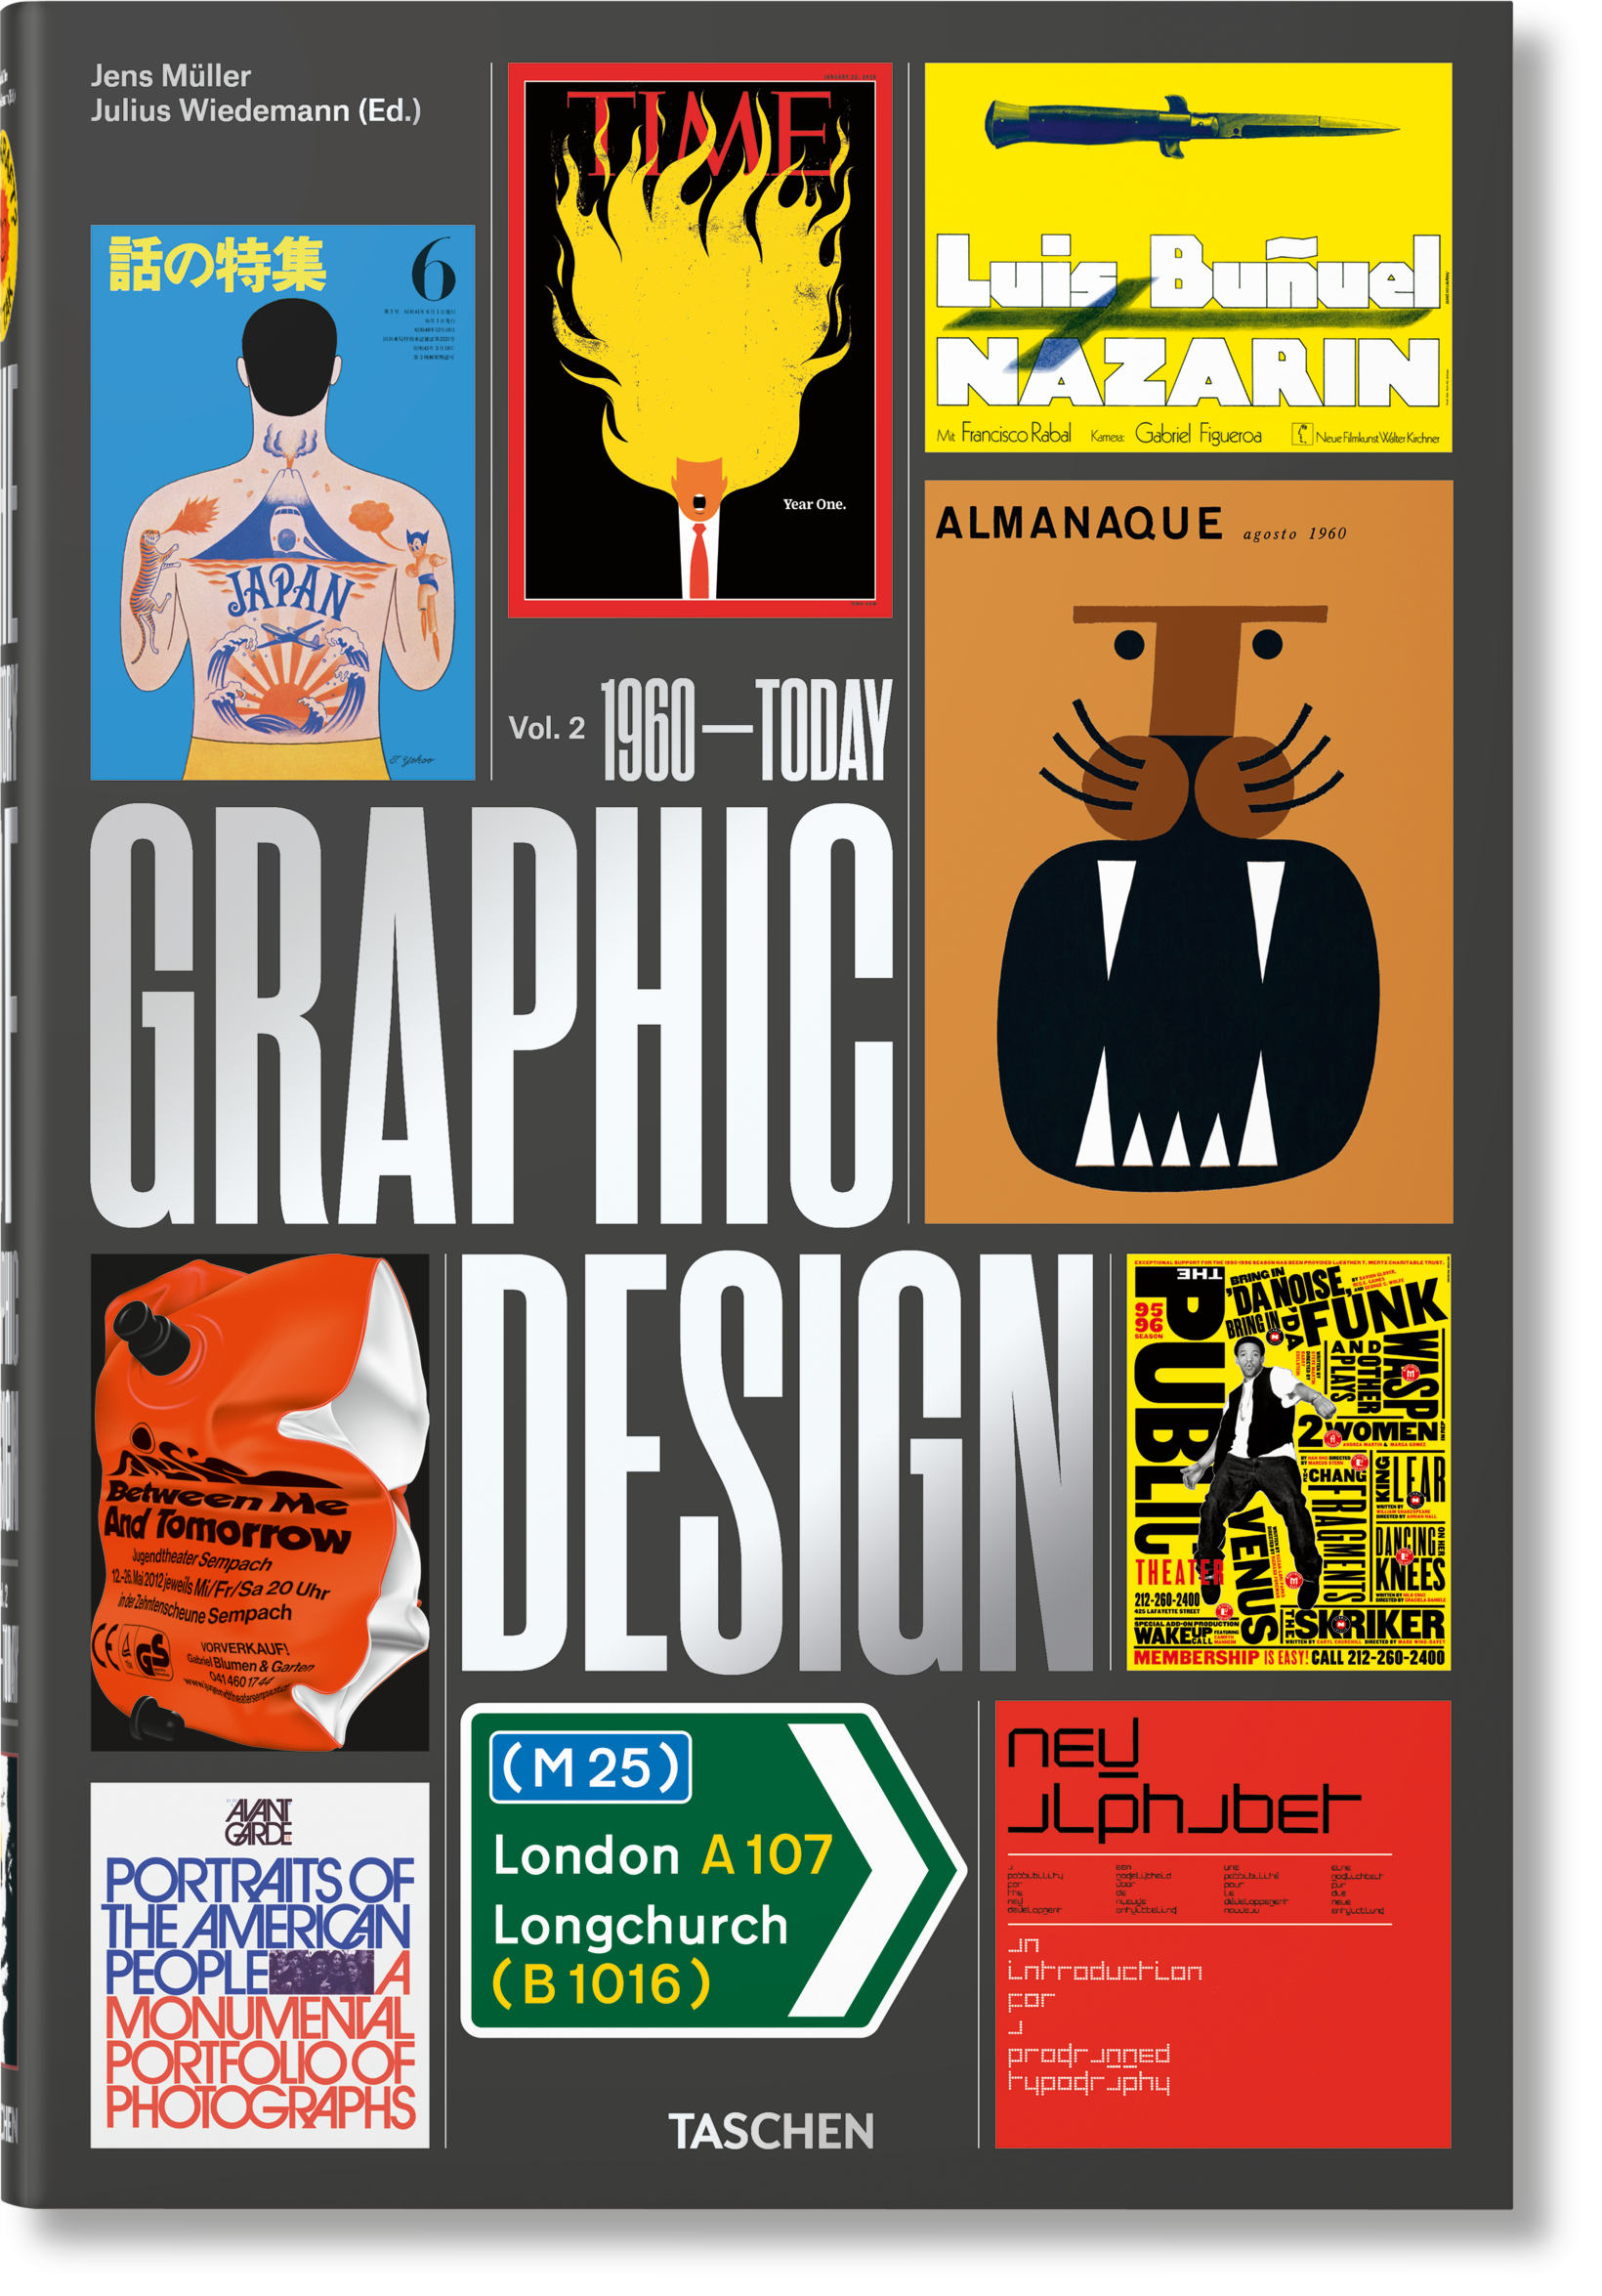 TASCHEN Books: The History of Graphic Design. Vol. 2. 1960–Today